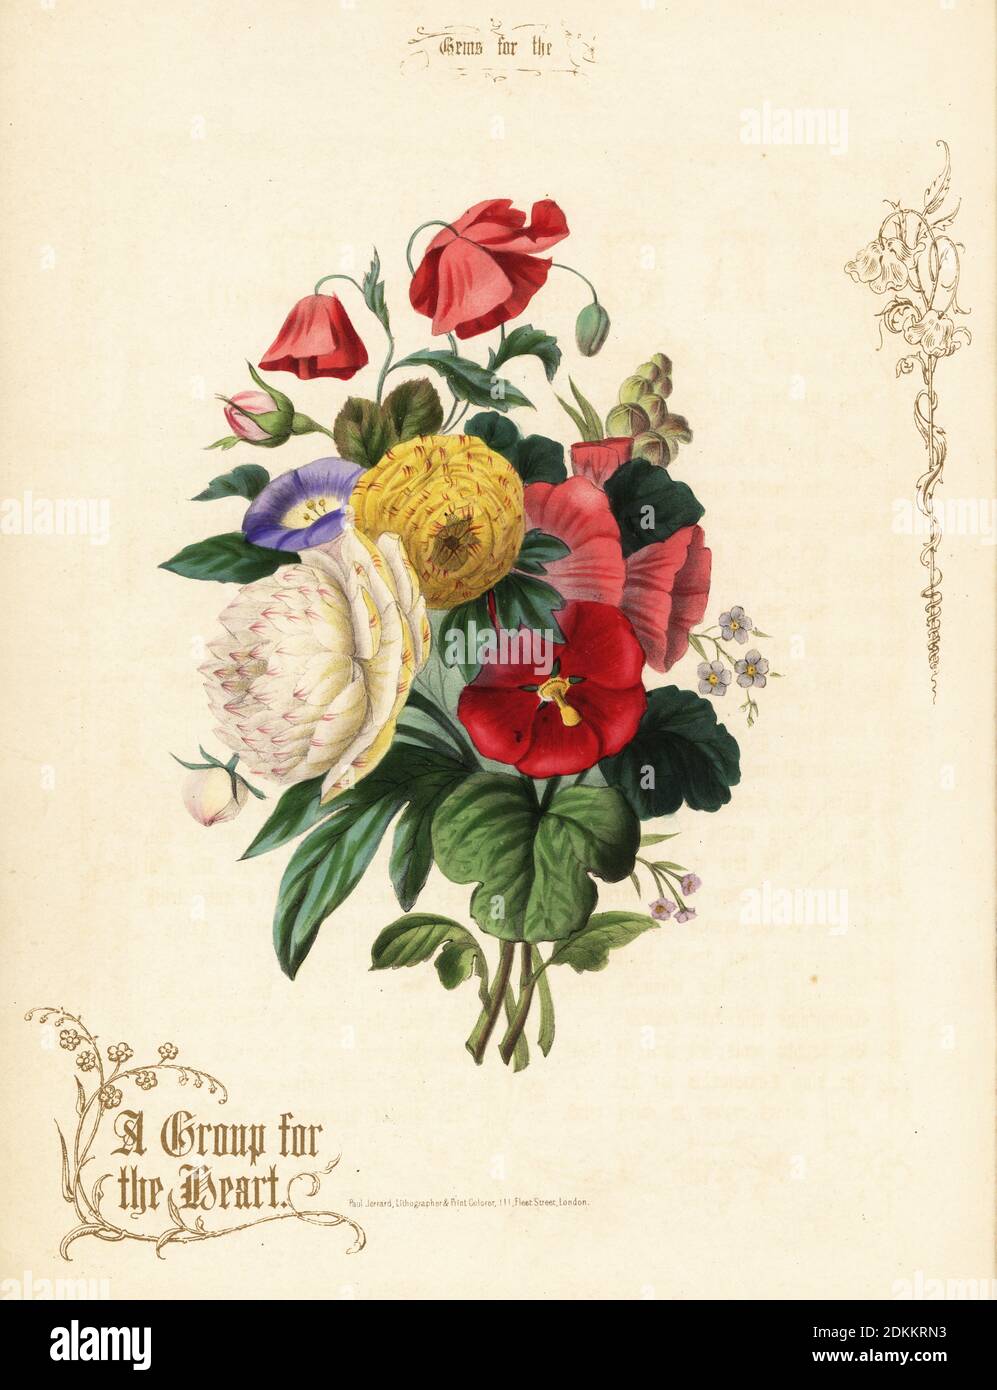 Bouquet of poppies, ranunculus, morning glory, hollyhock. The Group of the Heart. Hand-coloured lithograph with gold calligraphy by Paul Jerrard from his own Gems for the Drawing Room, Paul Jerrard, 111 Fleet Street, London, 1852. Jerrard was a Victorian lithographer and print colourer active in London. Stock Photo